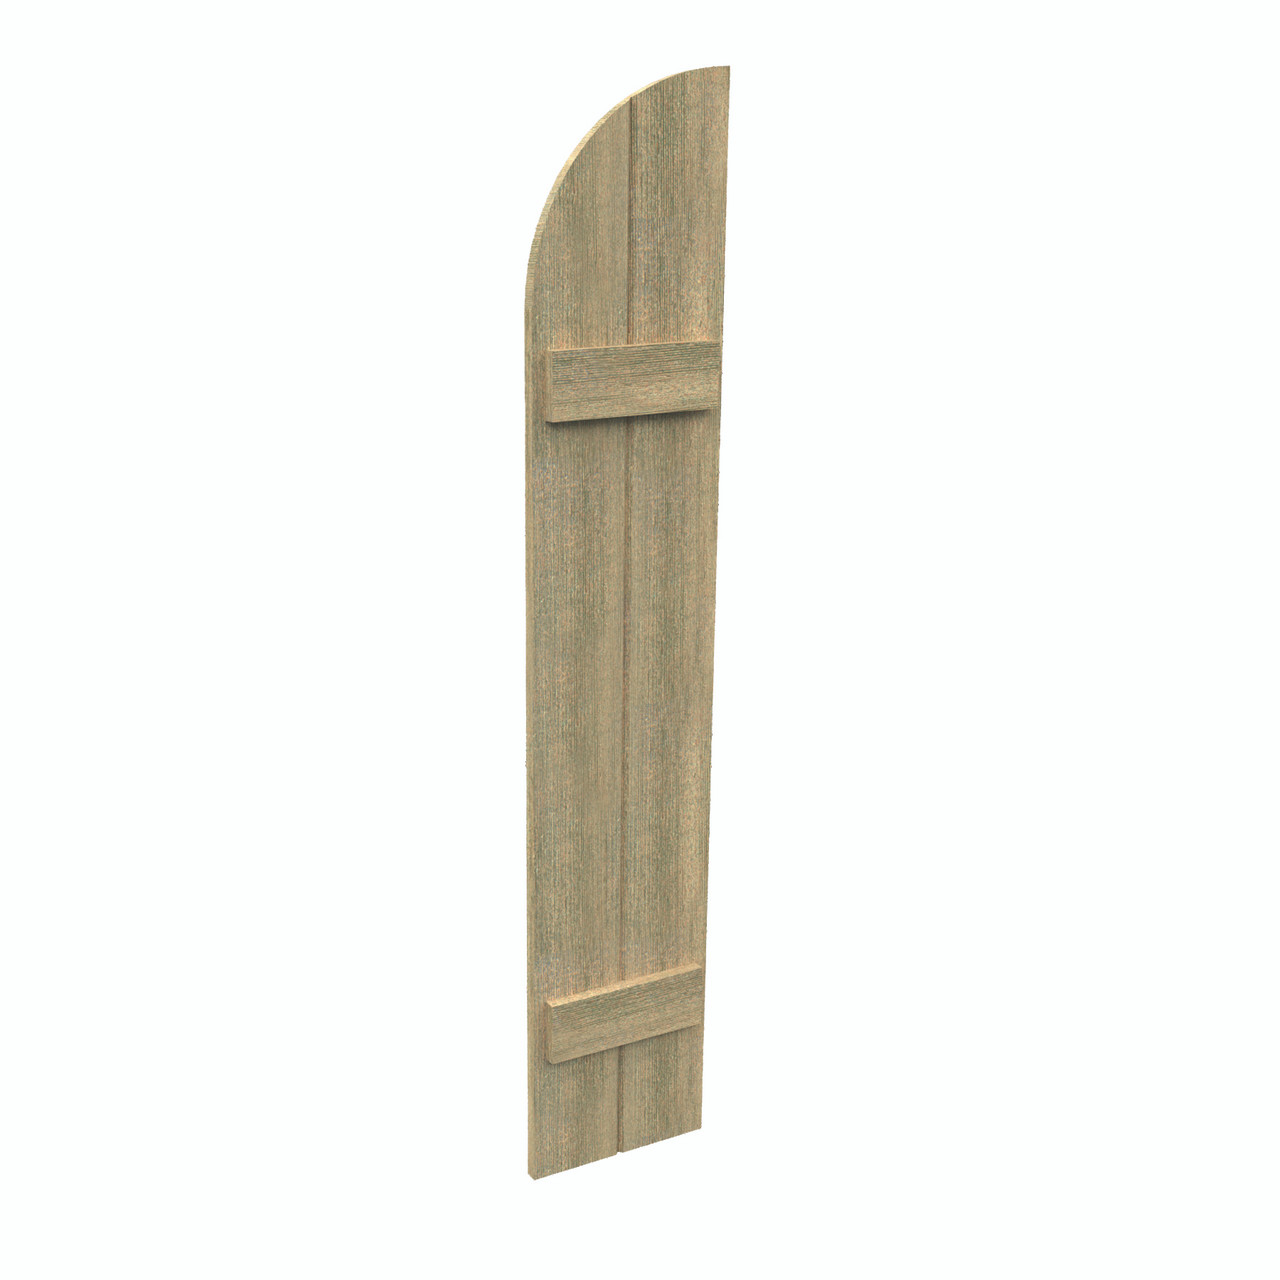 12 inch by 105 inch Quarter Round Shutter with 2-Boards